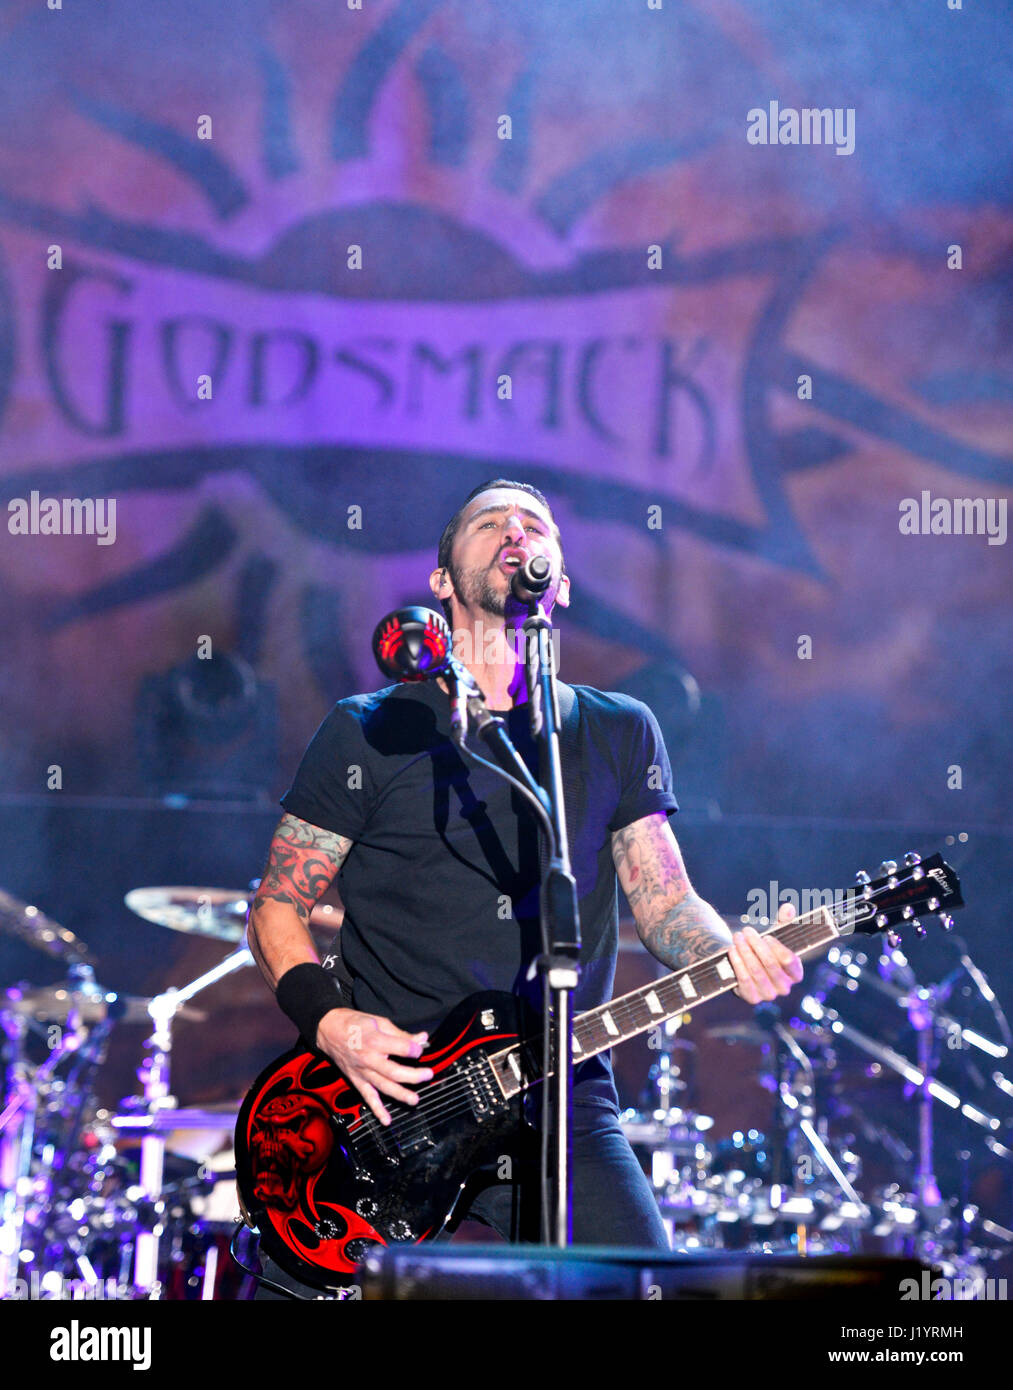 Las Vegas, USA. 21st Apr, 2017. Las Vegas Nevada, April 21, 2017 - Sully Erna, Guitarist and front man of GodSmack at Las Rageous in the Downtown Event Center (DLVEC) in Las Vegas Nevada Credit: Ken Howard/Alamy Live News Stock Photo